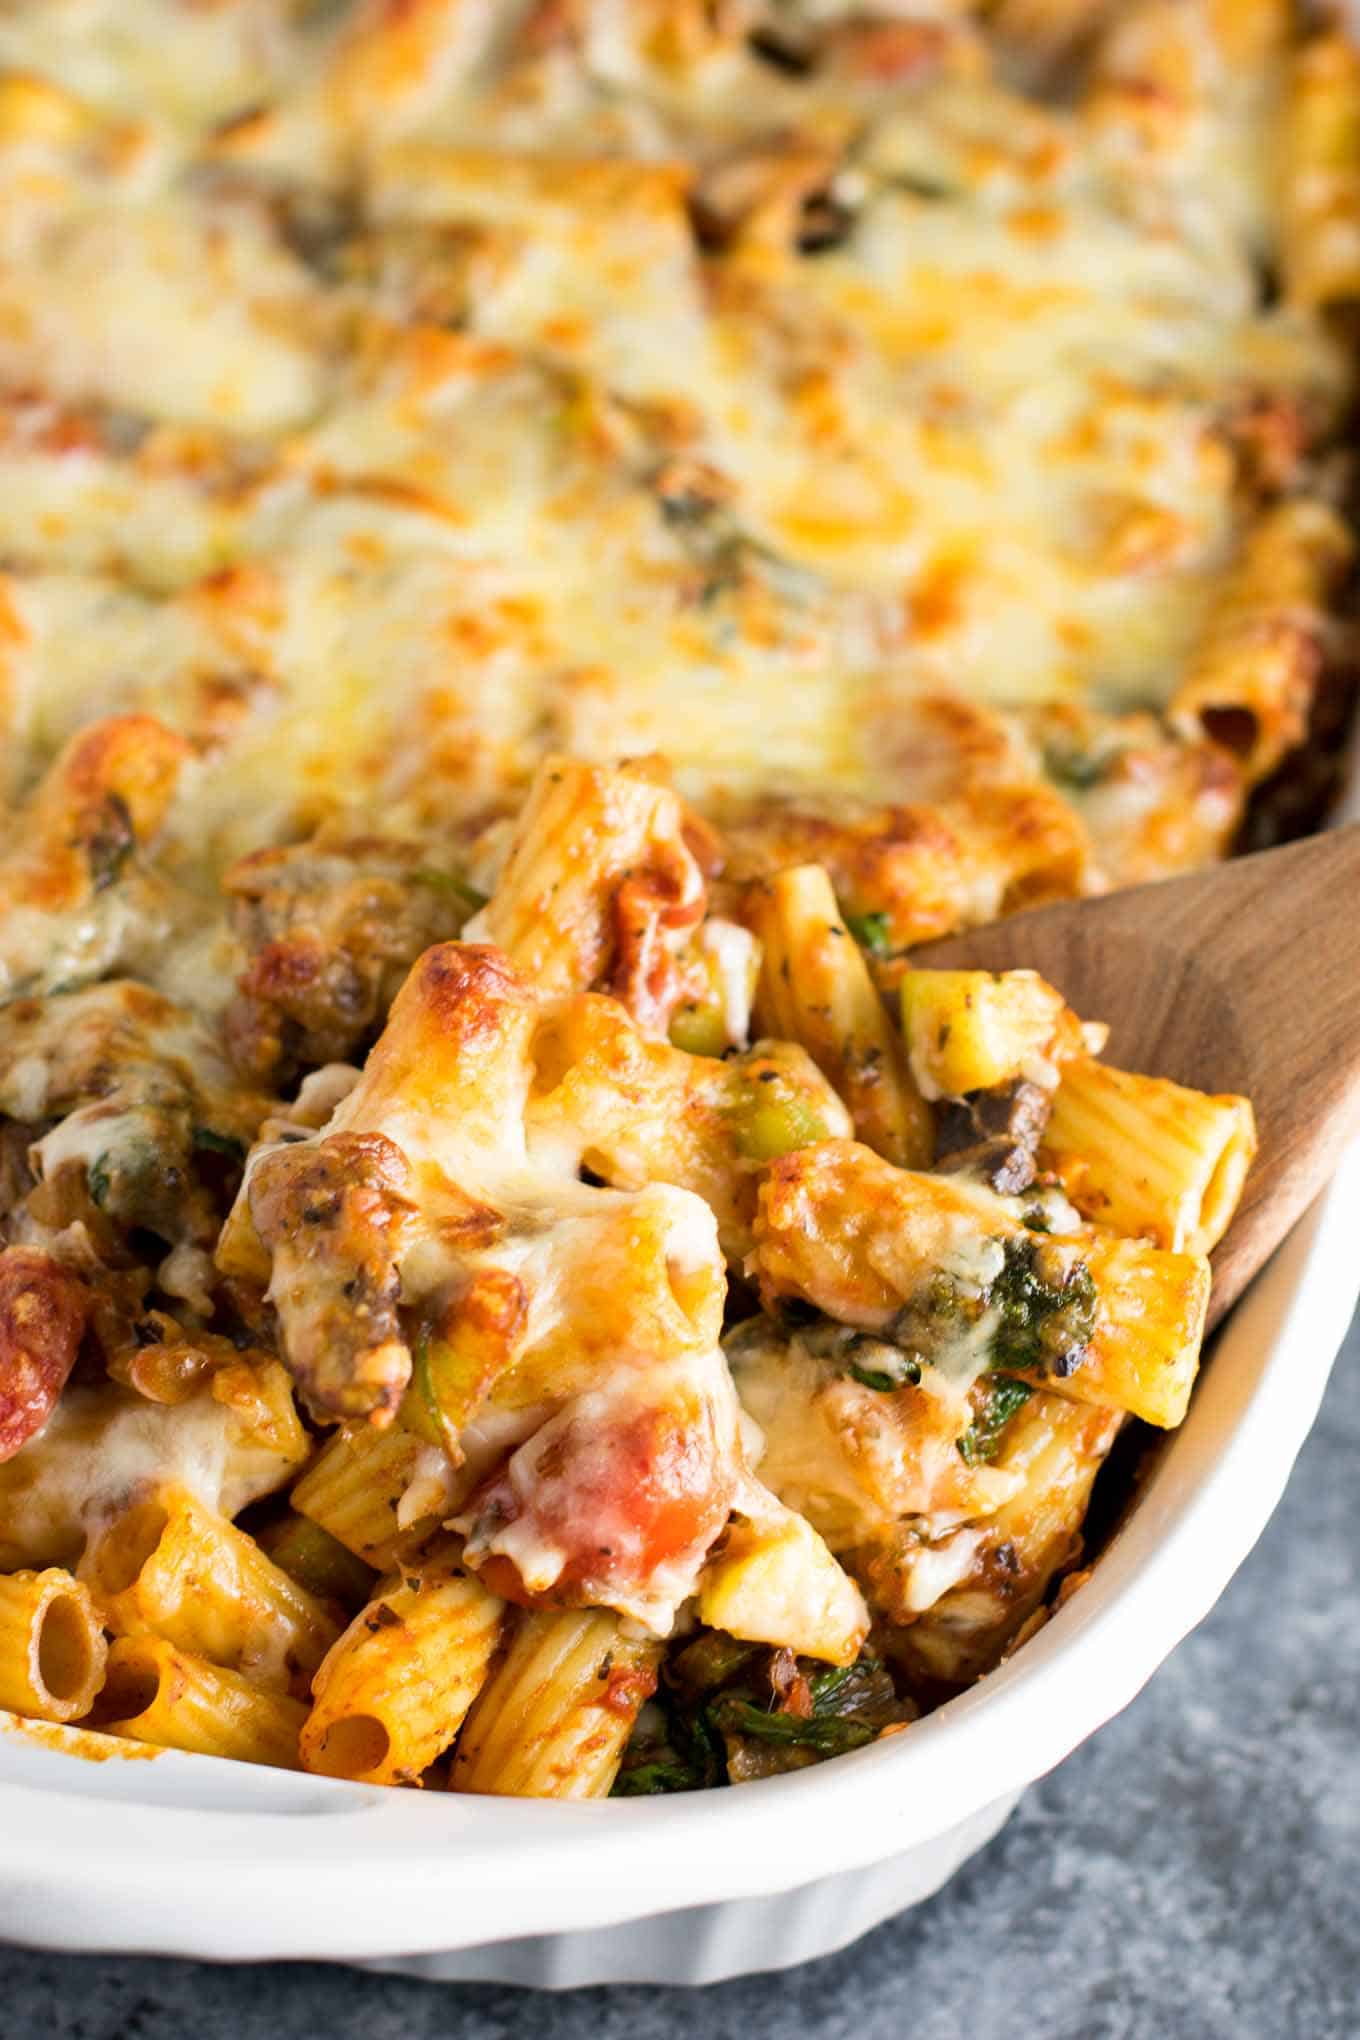 This veggie lover's baked rigatoni is packed full of cherry tomatoes, onions, garlic, mushrooms, bell peppers, zucchini, and spinach. A hearty and delicious vegetarian dinner!